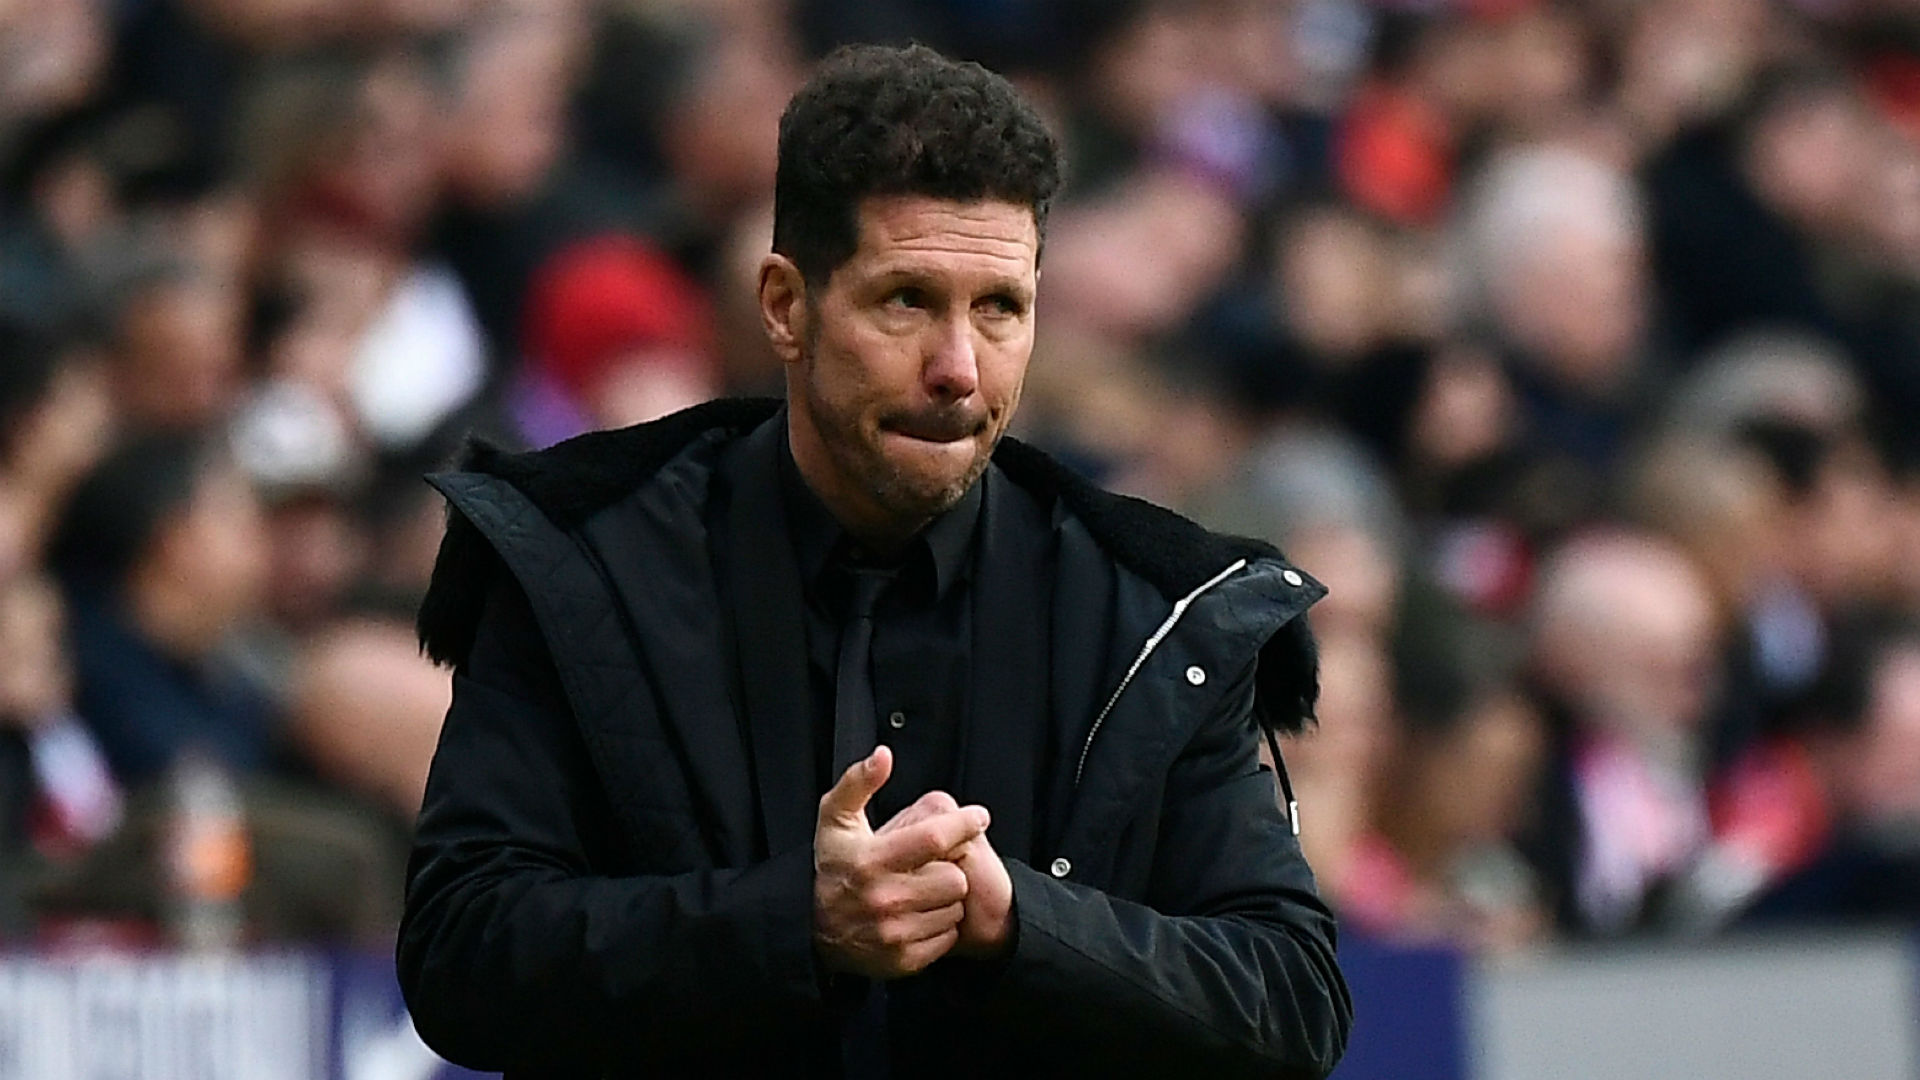 Arsenal-linked Simeone rubbishes reports of dressing room discord at Atletico